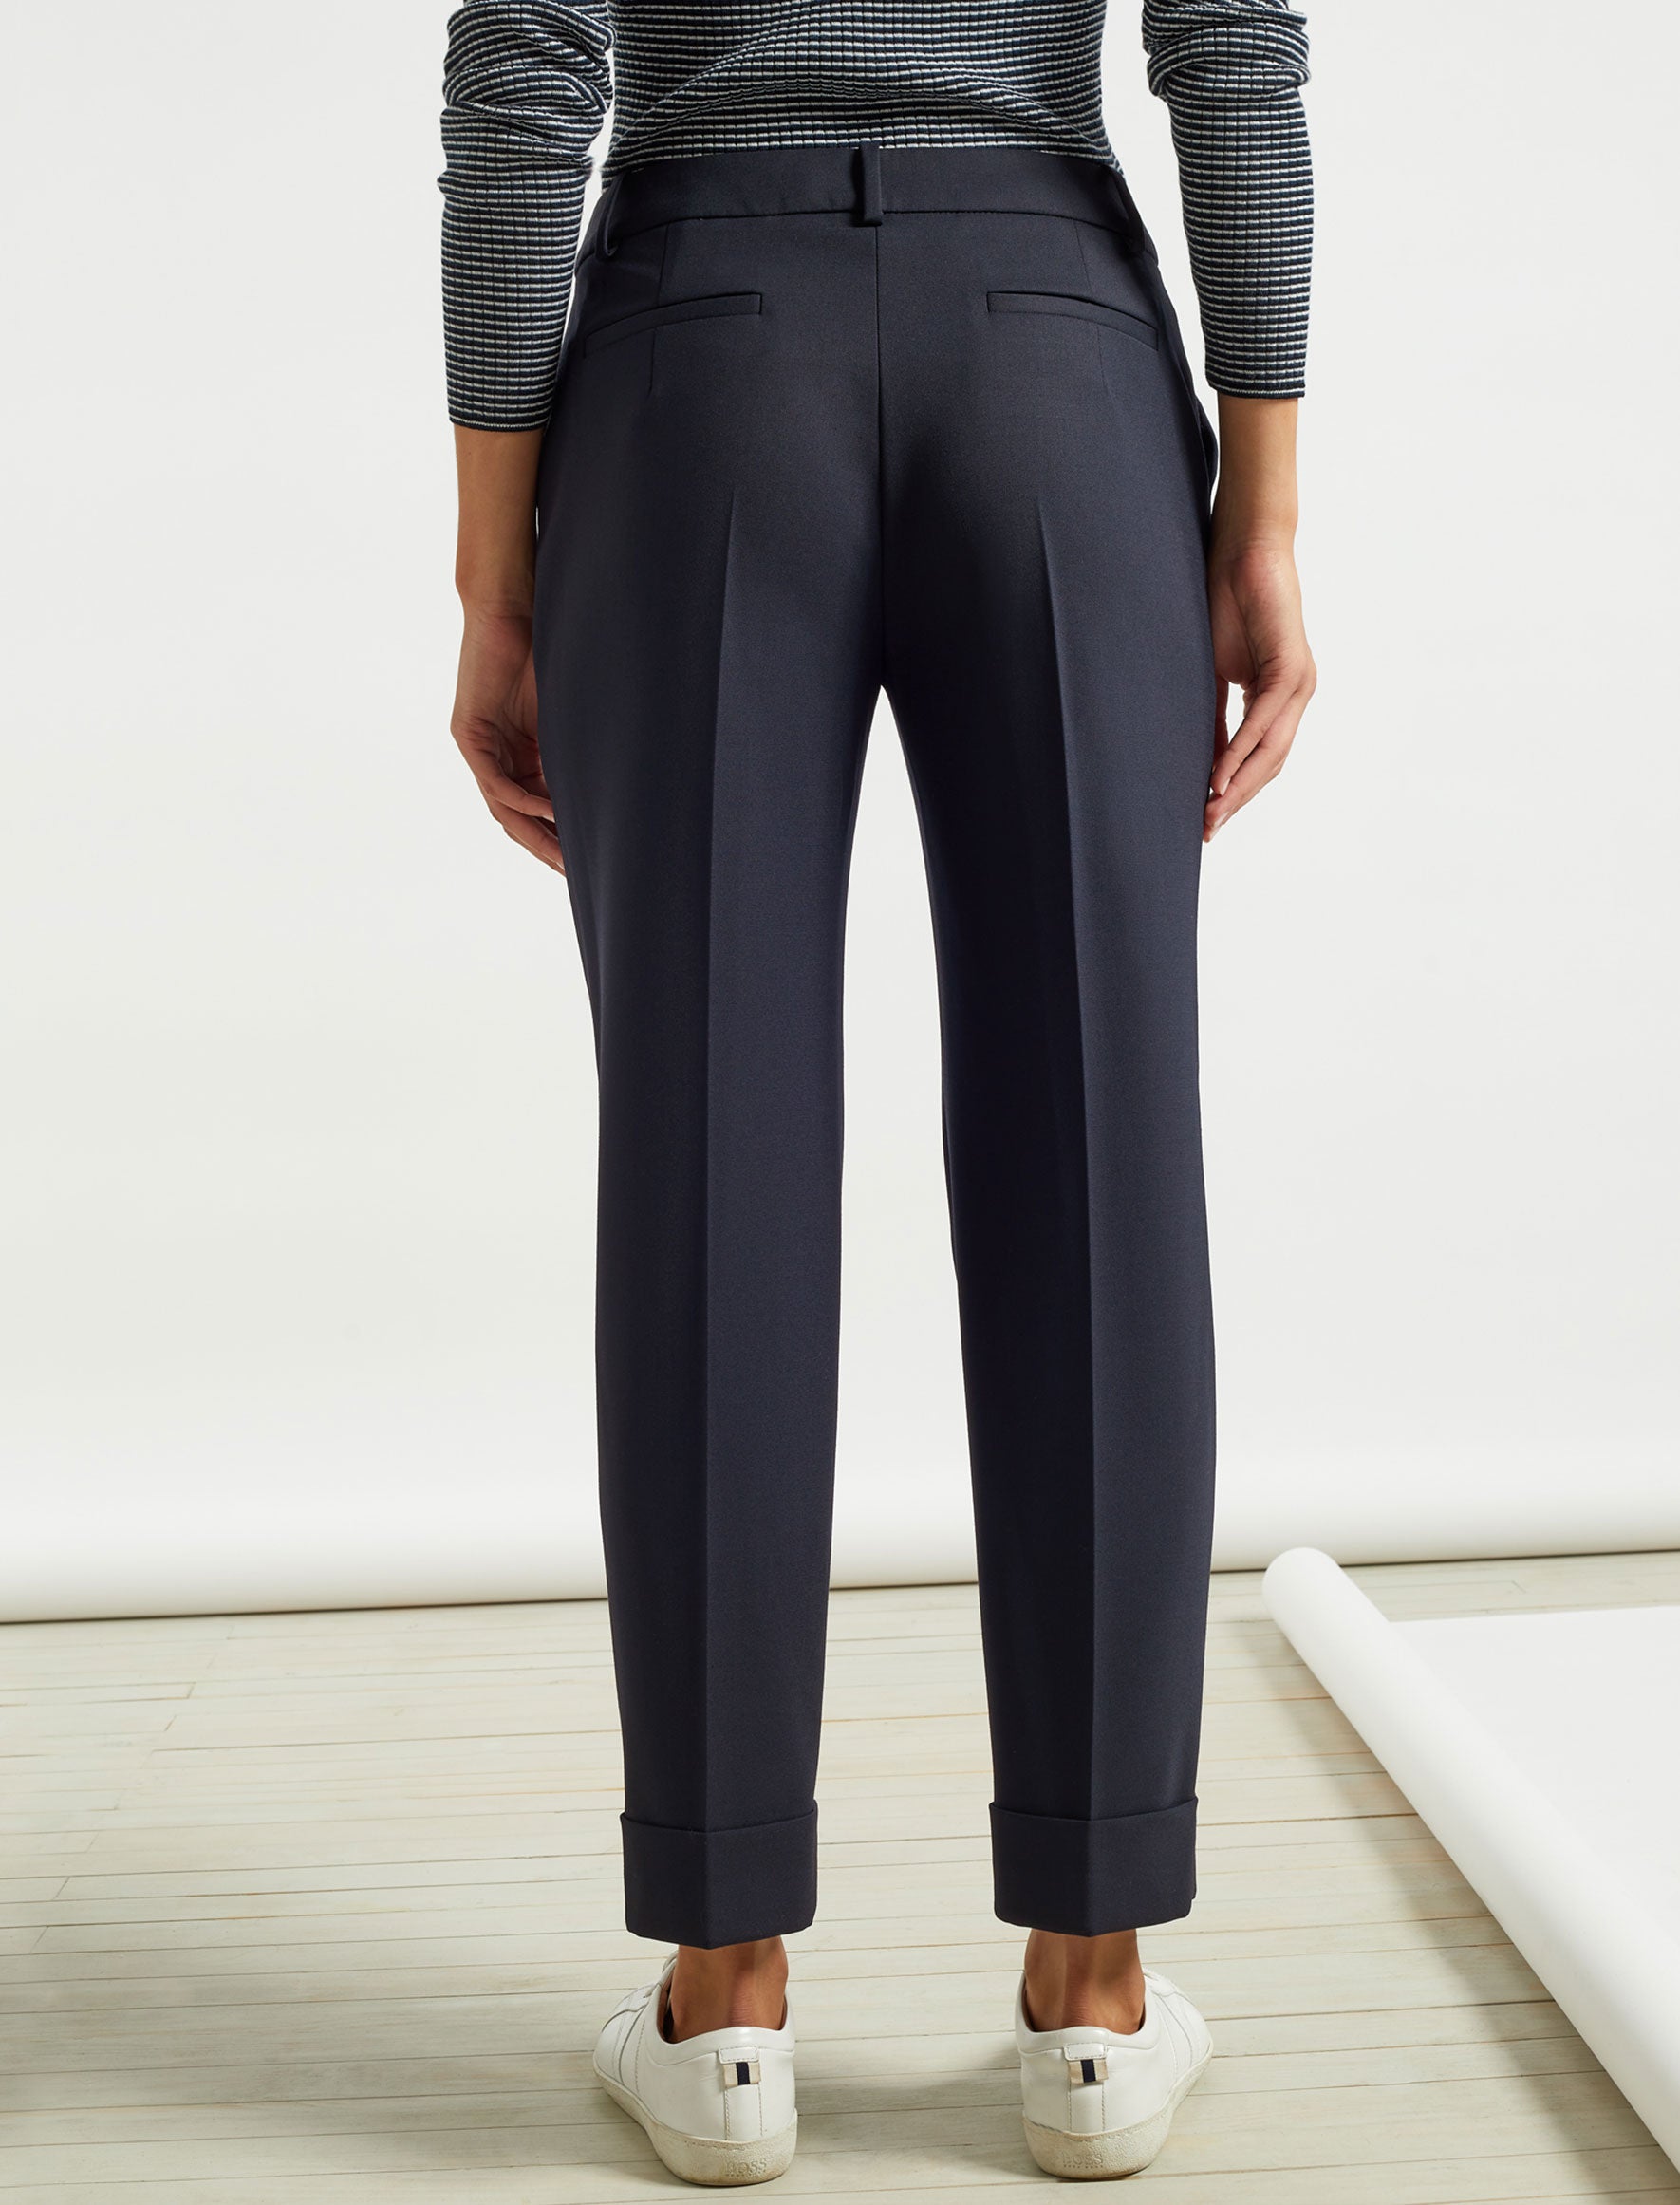 Clement Tailored Turn Up Wool Blend Trousers in Navy